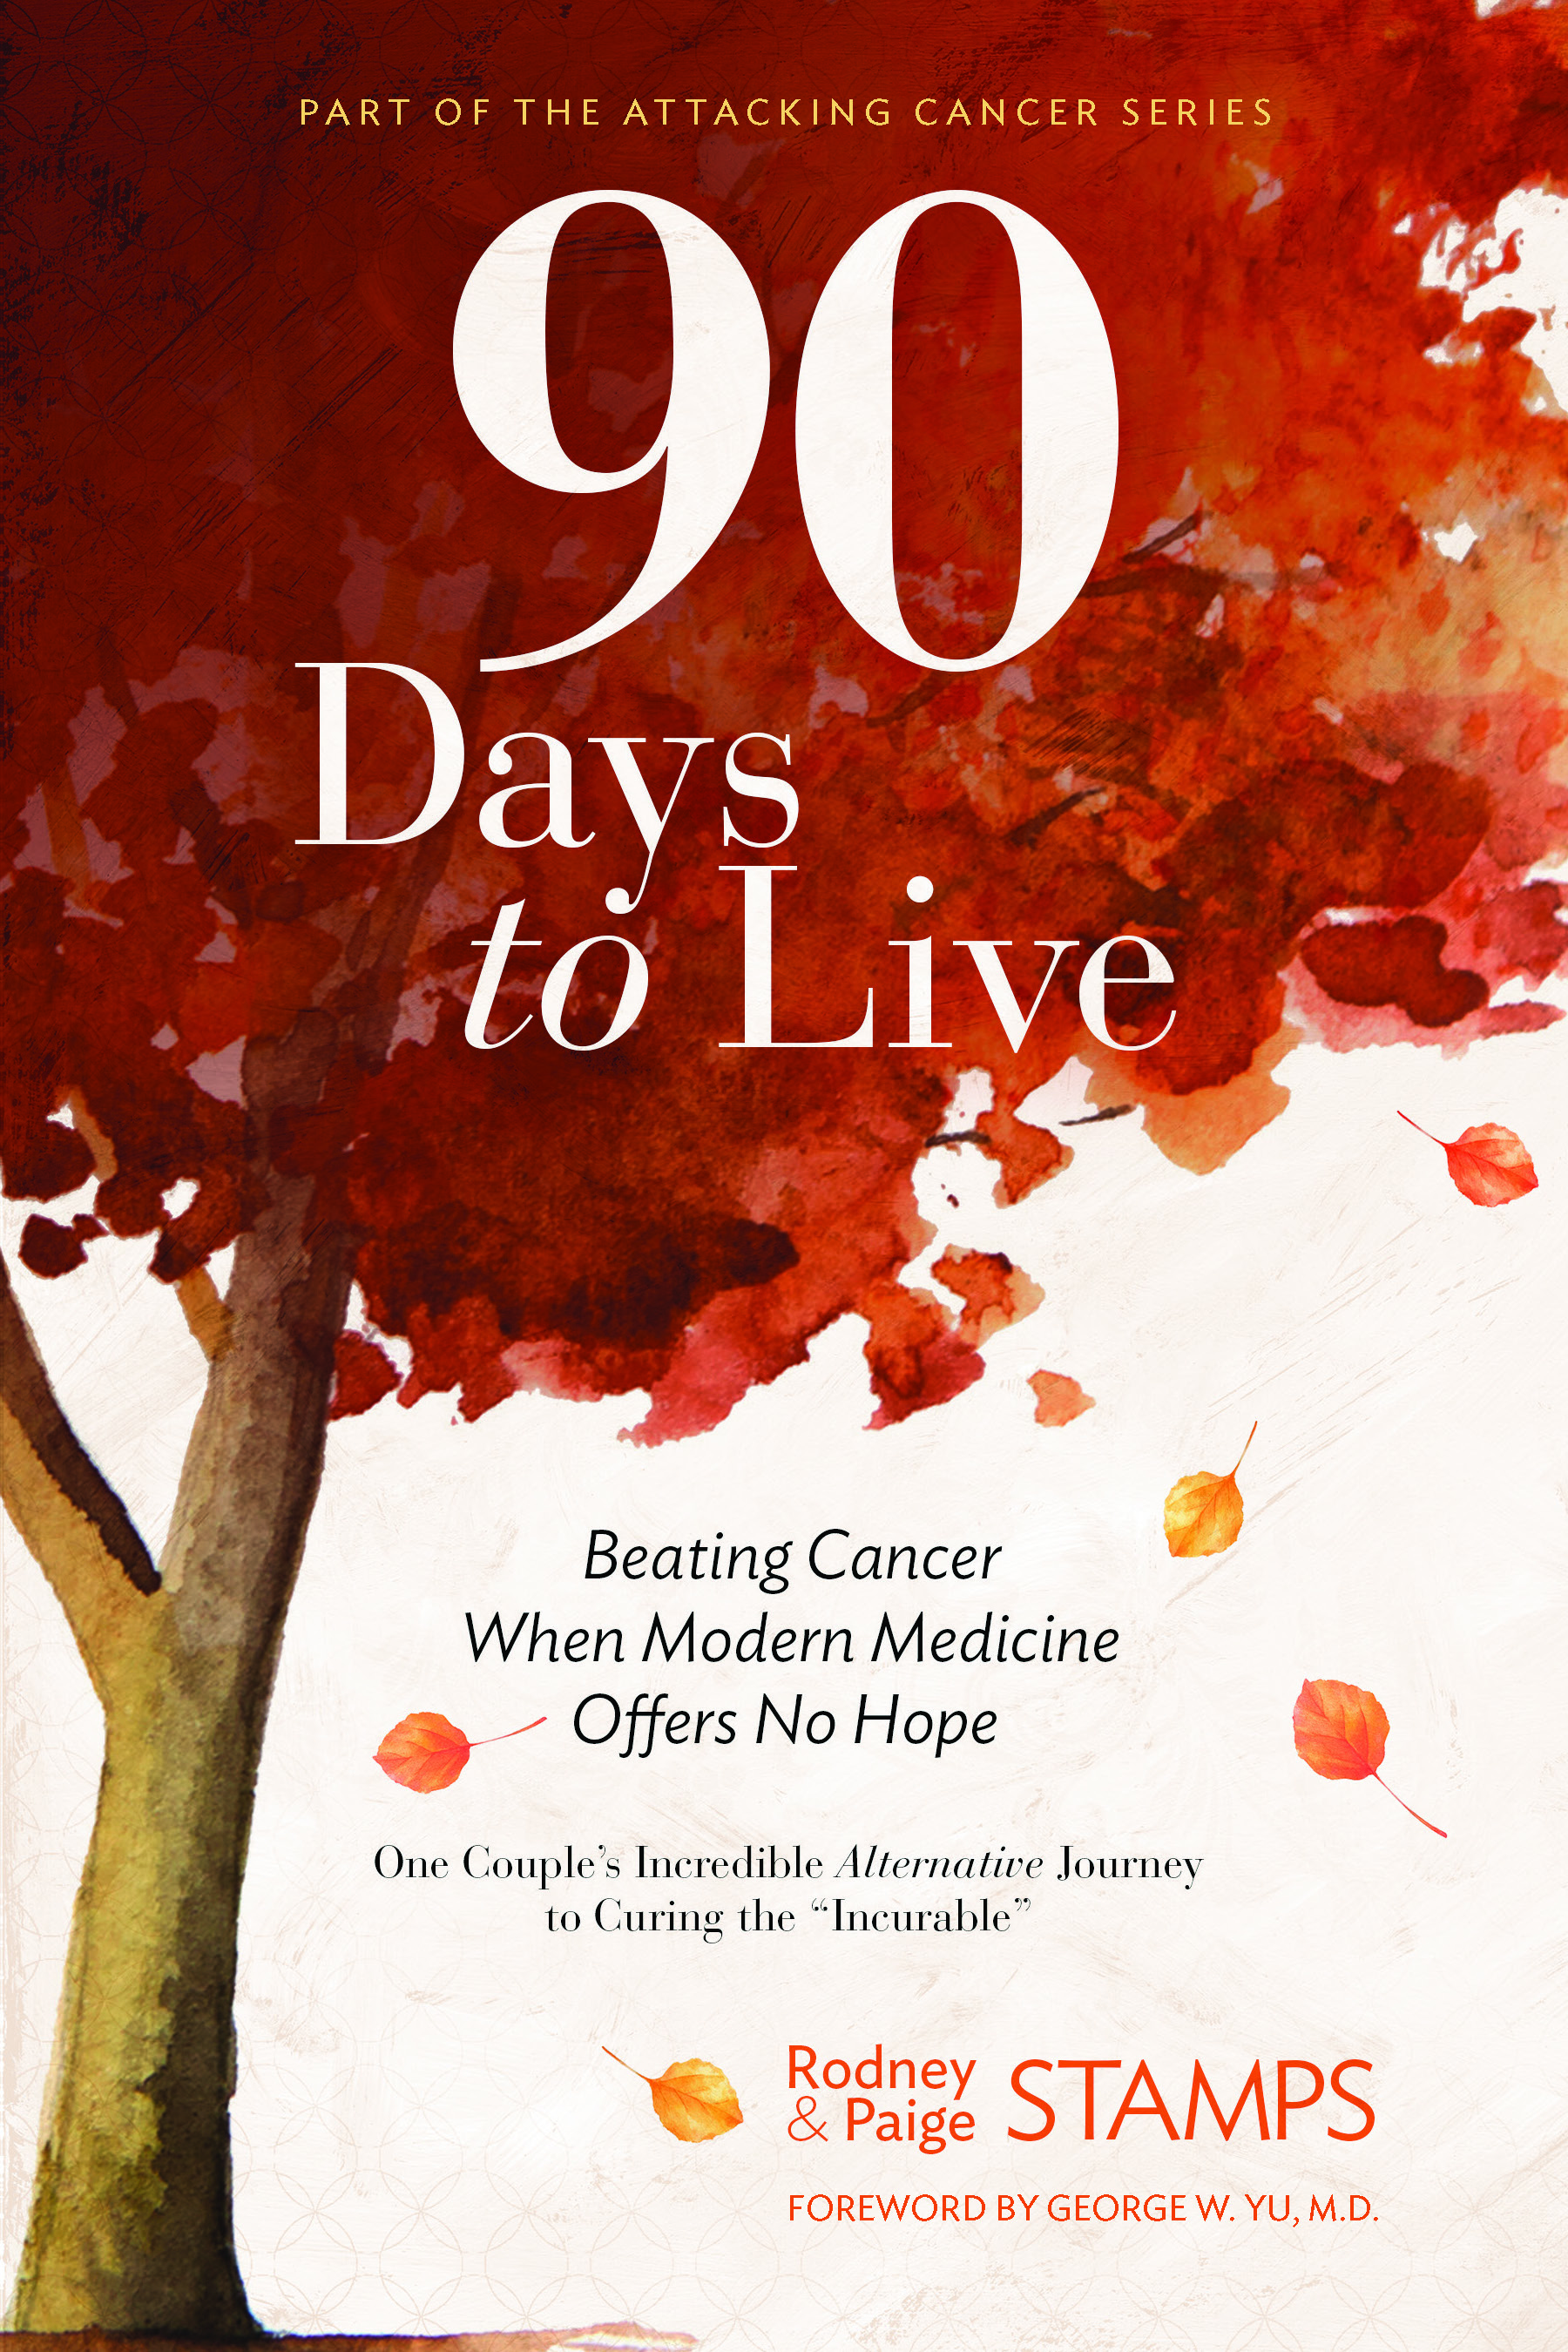 FREE: 90 Days to Live by Rodney & Paige Stamps